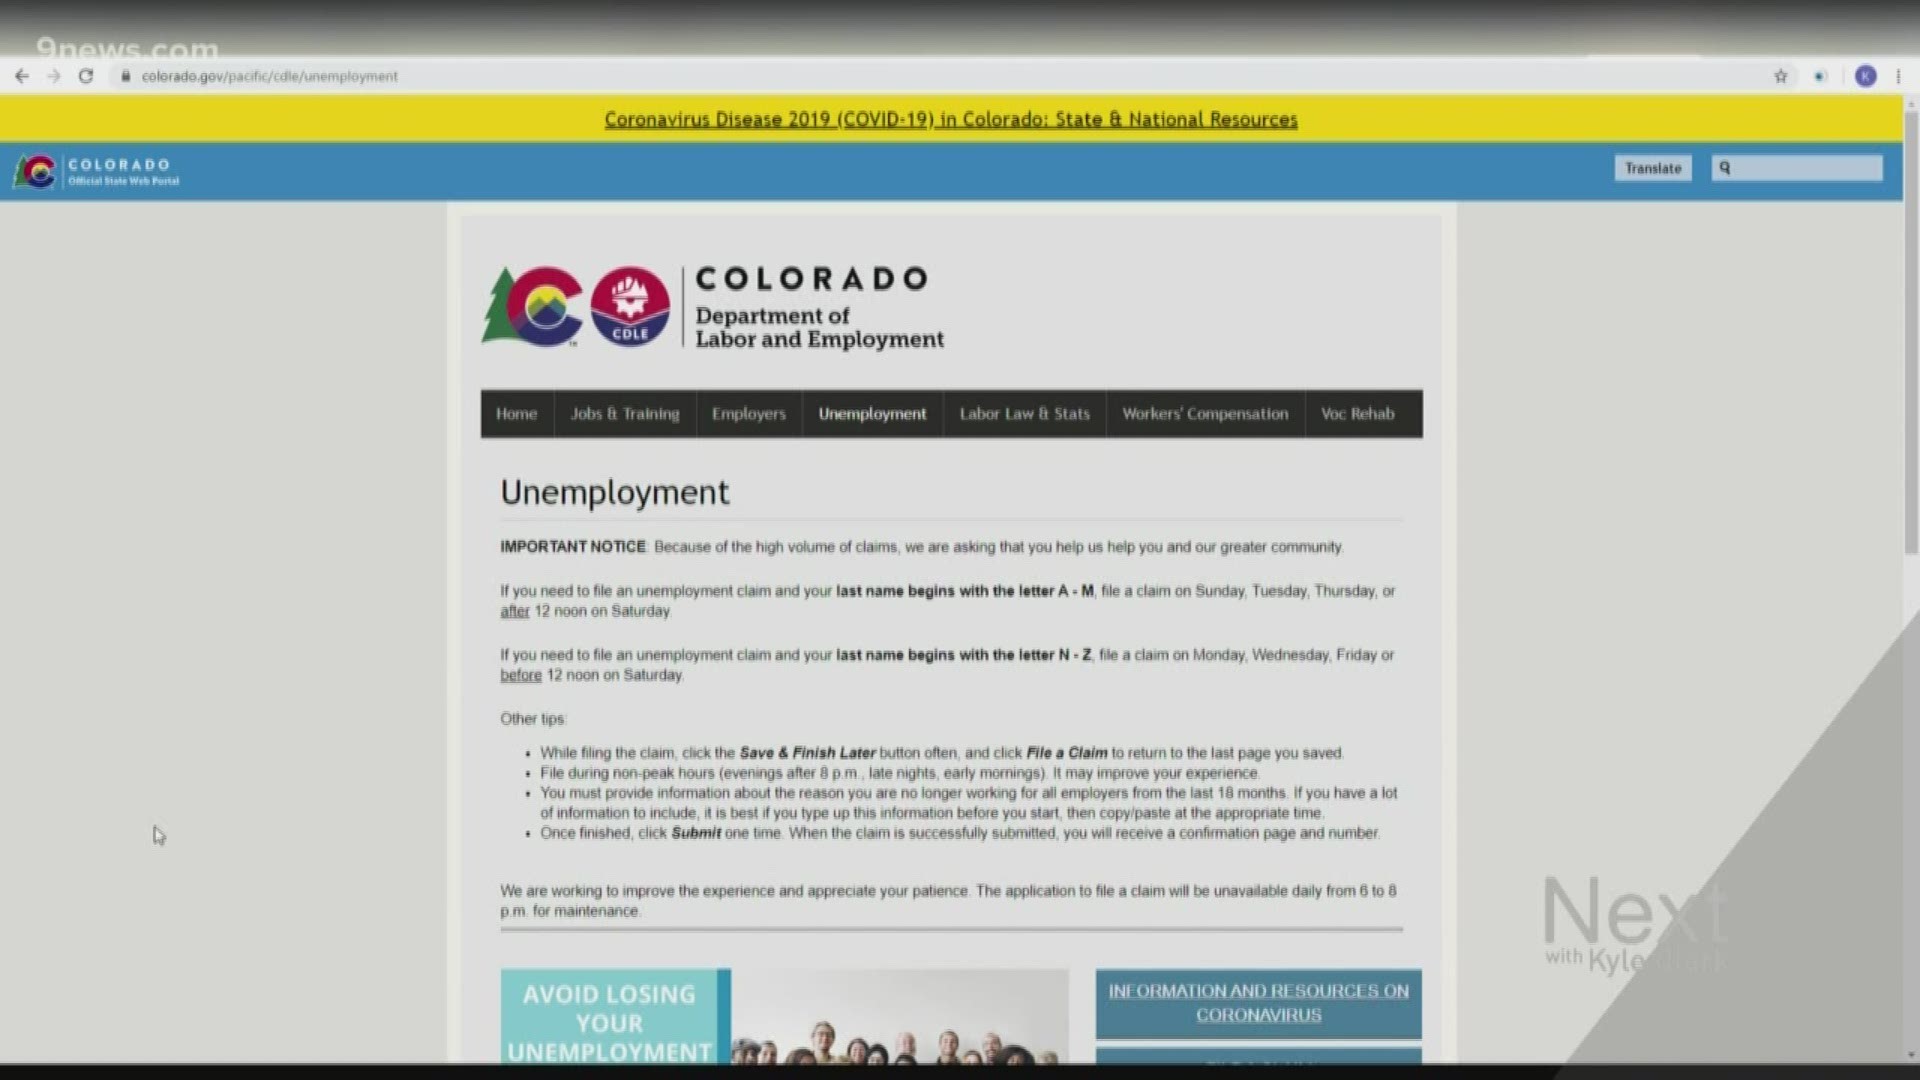 Tens of thousands of Coloradans laid off during the COVID-19 outbreak have been flooding the Department of Labor's website in the last few weeks, and it's crashing.